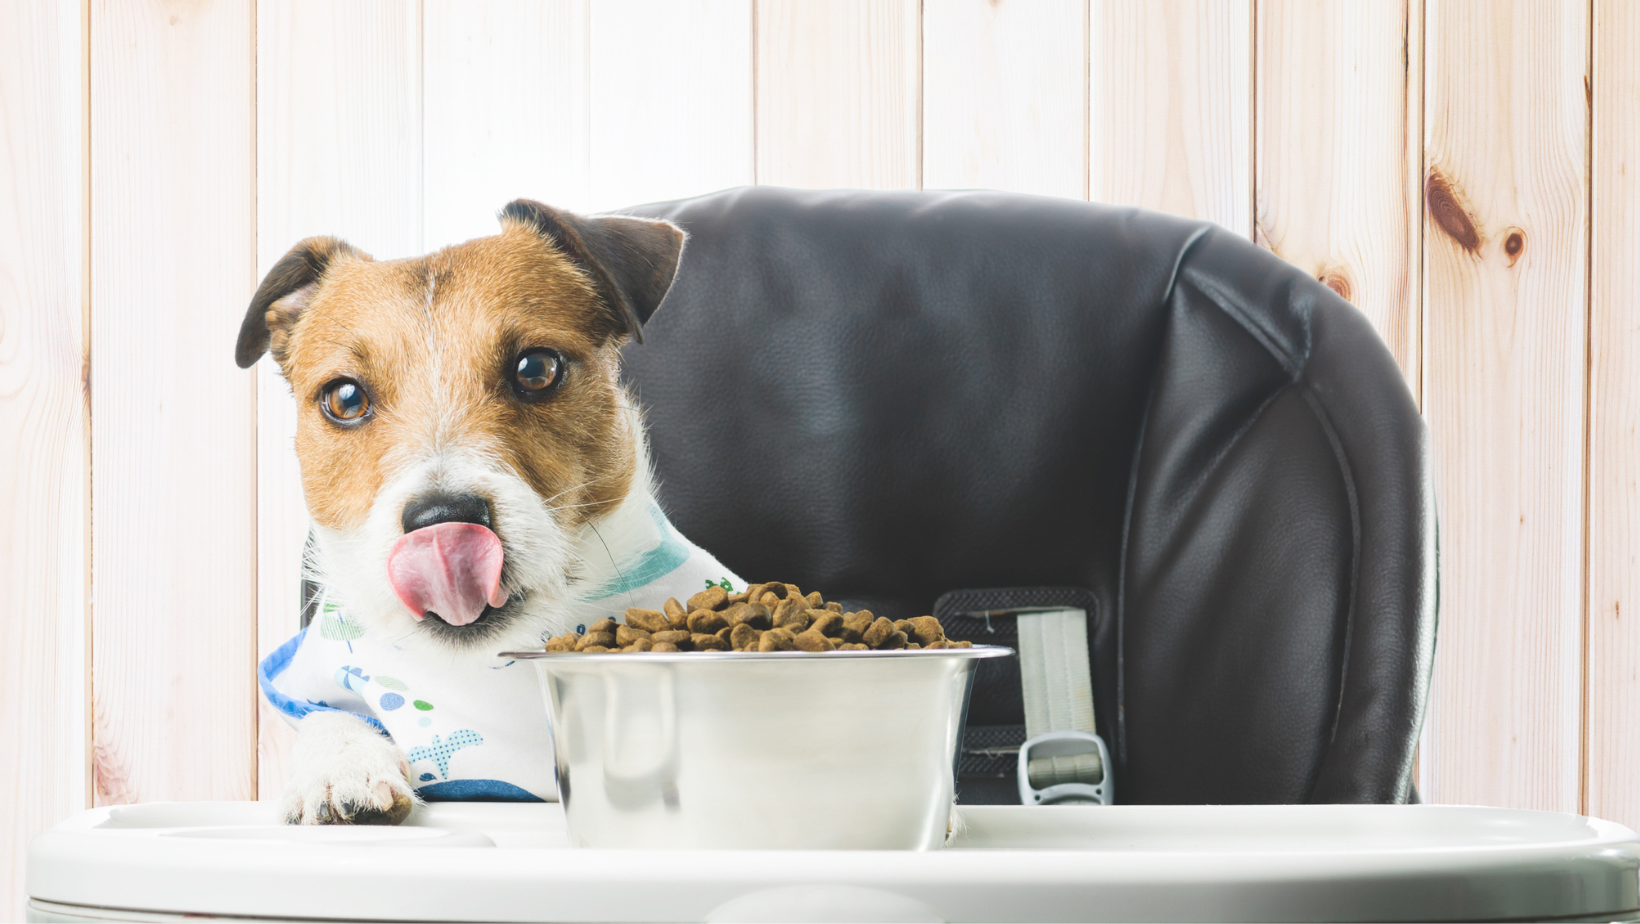 Ways To Prevent Your Dog From Overeating Dry Food